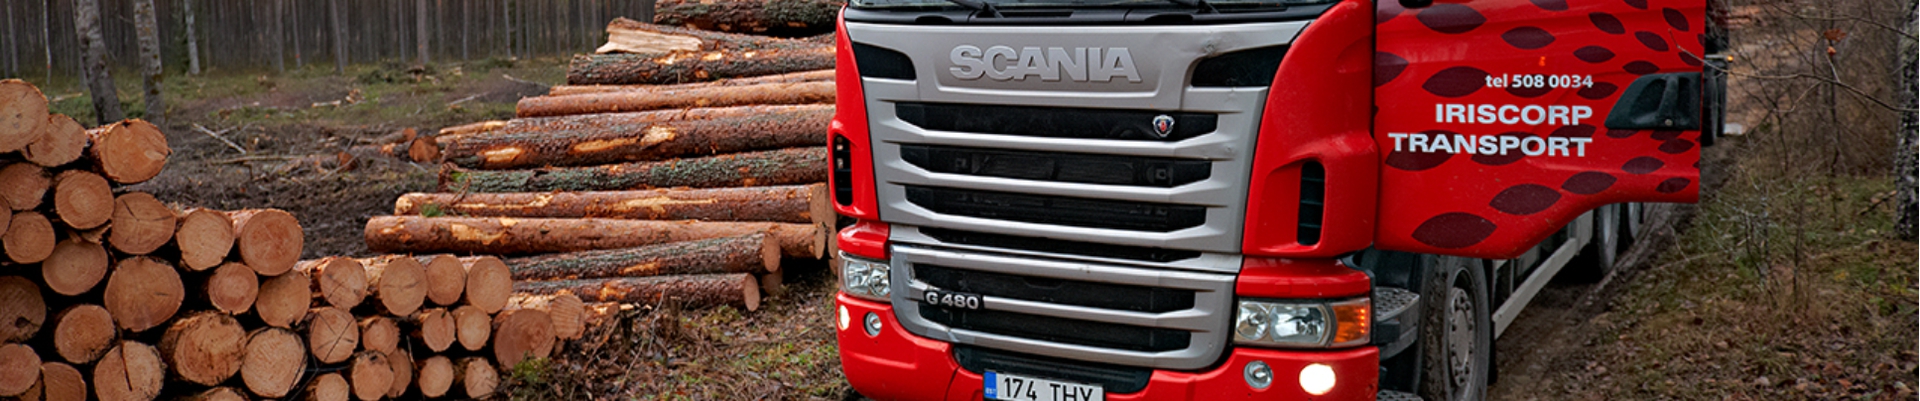 Transport of timber, right to cut growing forest, purchase and sale of timber, purchase of forest properties, logging, carriage of firewood, forest transport service, scania trucks, Exports of timber, Wood and Paper Industry